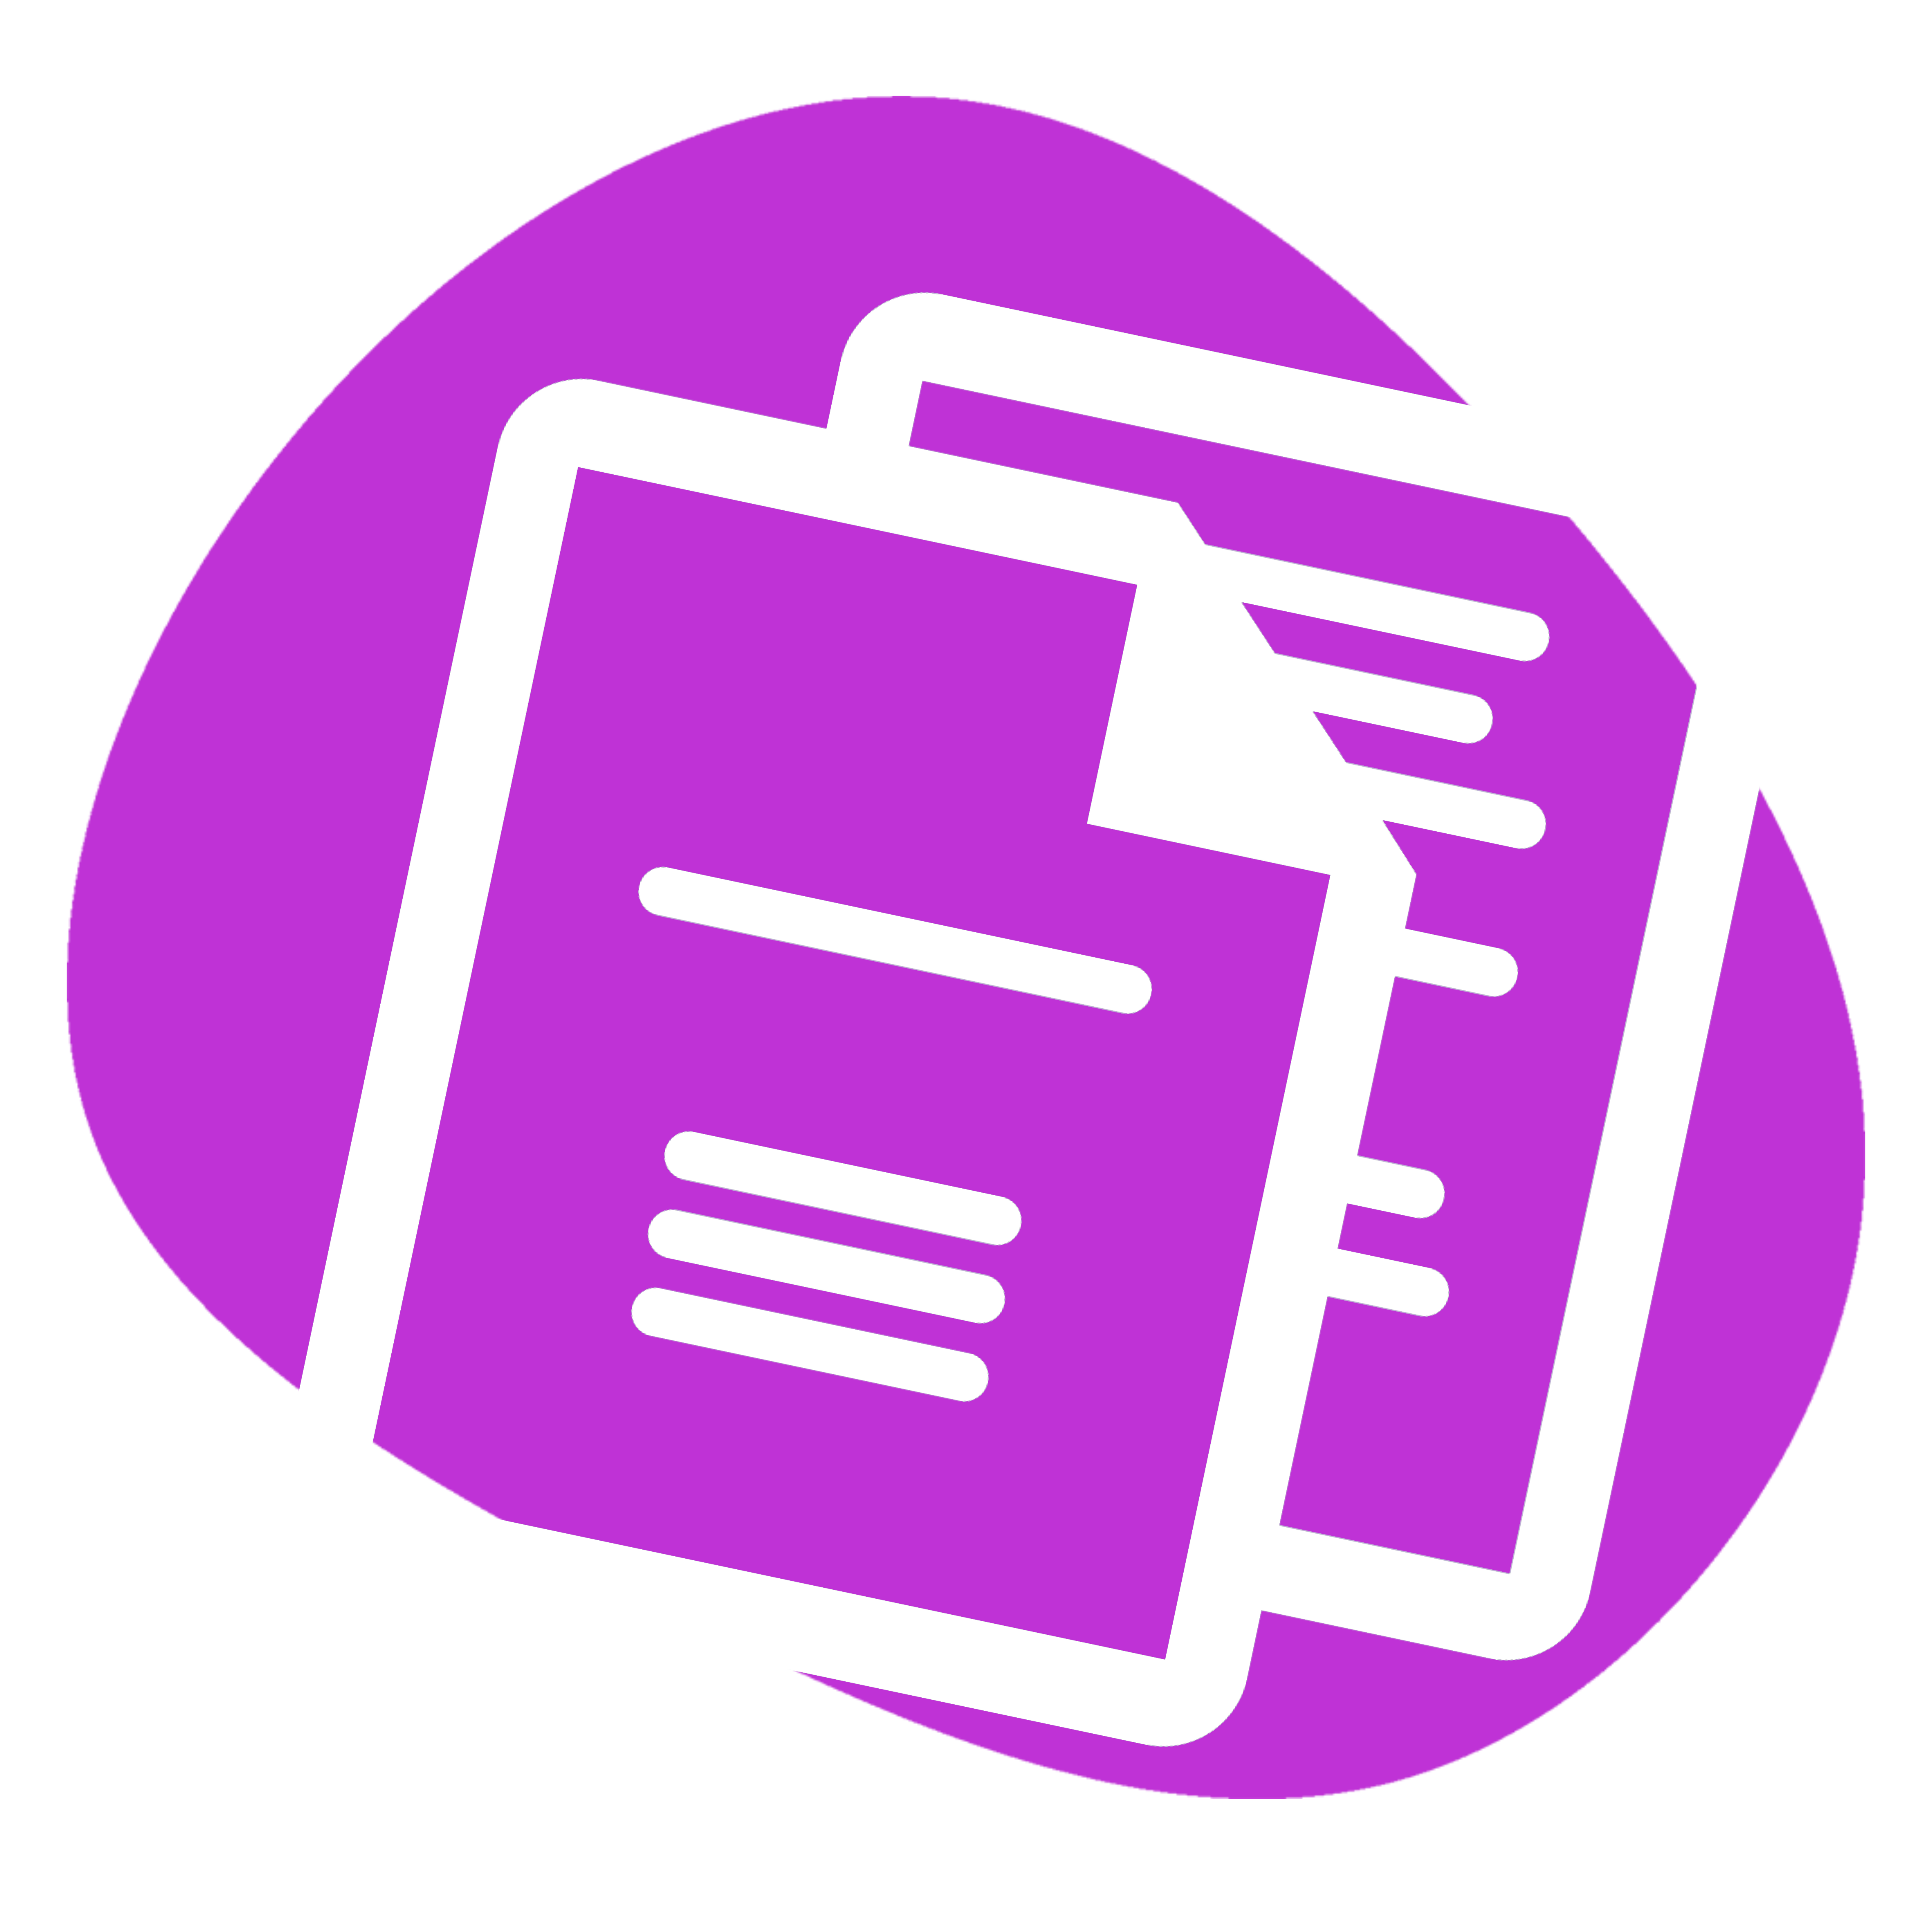 A fuchsia blob with an overlay of a document icon in white